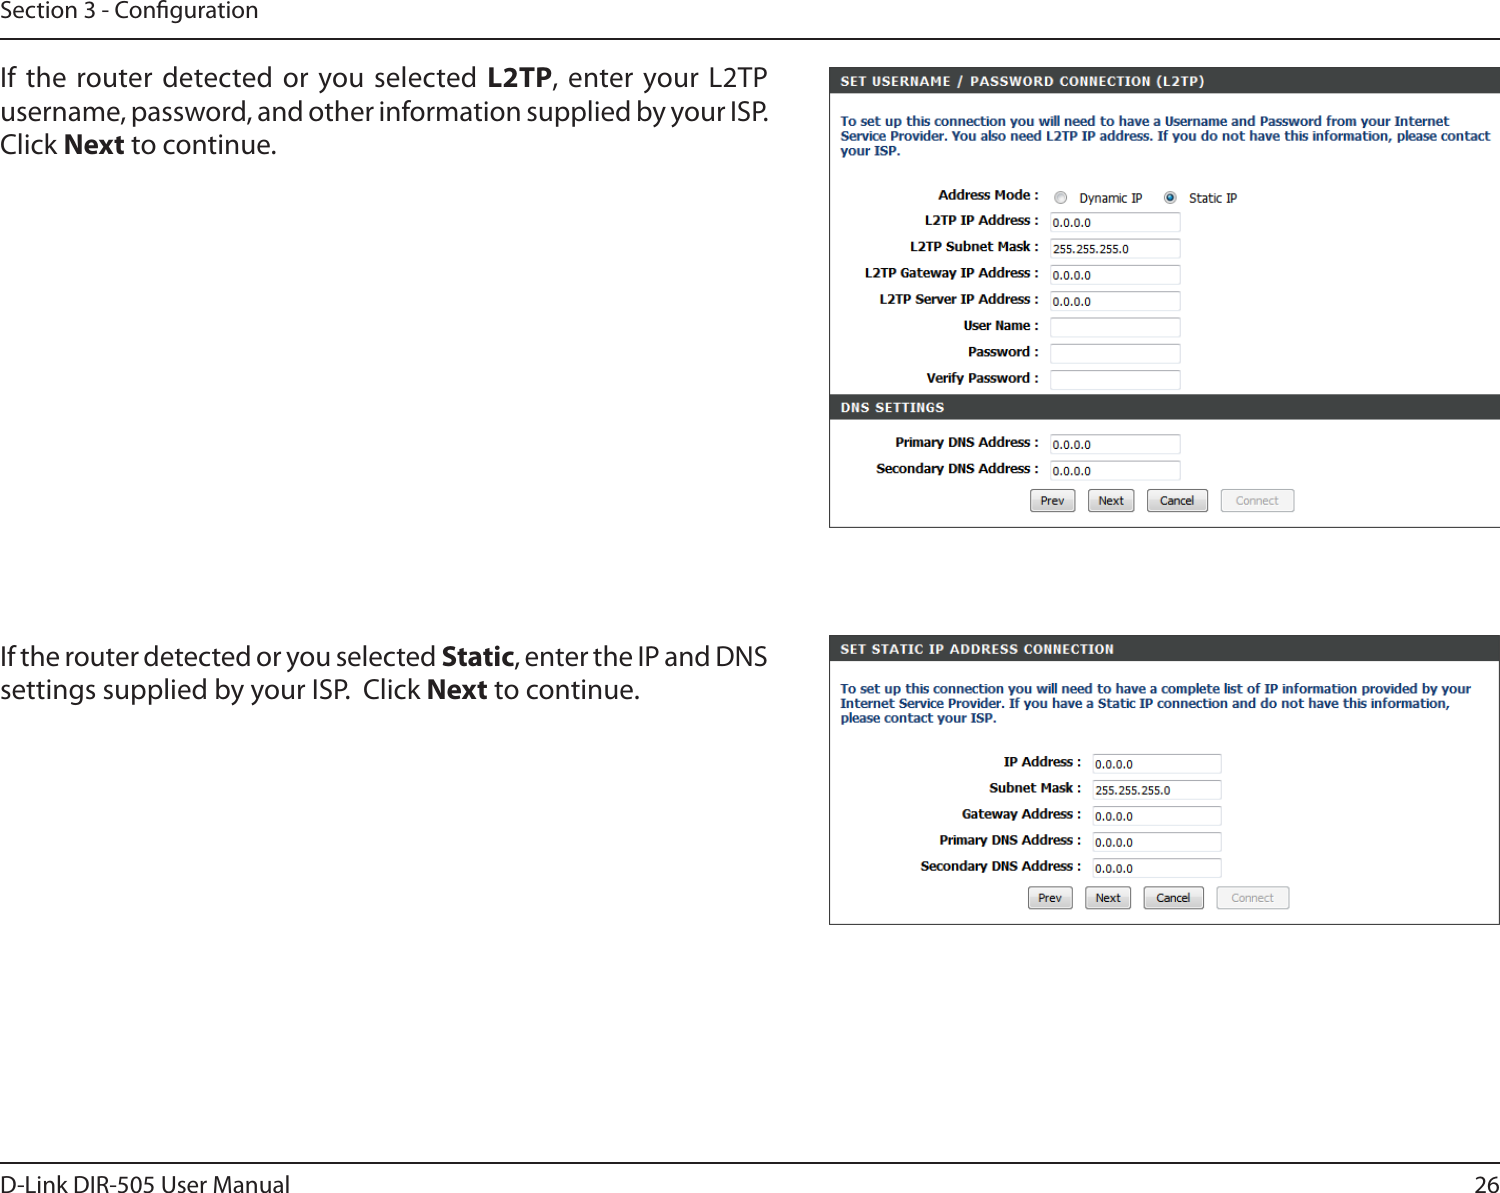 26D-Link DIR-505 User ManualSection 3 - CongurationIf the  router detected or you selected  L2TP, enter your L2TP username, password, and other information supplied by your ISP. Click Next to continue. If the router detected or you selected Static, enter the IP and DNS settings supplied by your ISP.  Click Next to continue. 